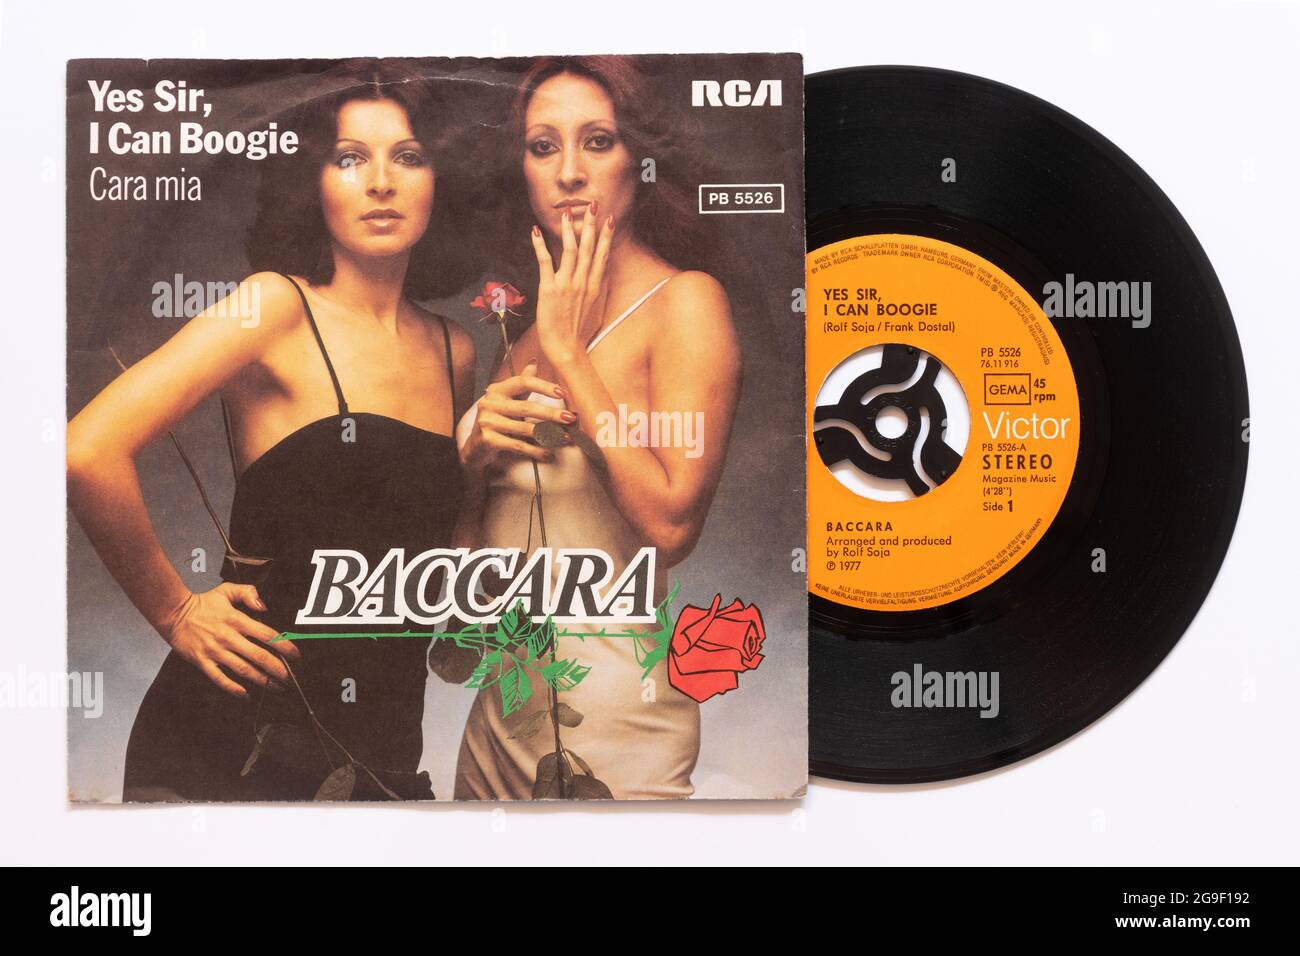 'Yes Sir, I Can Boogie' by the Spanish vocal duo Baccara, a stock photo of the 7' single vinyl 45 rpm record in picture sleeve Stock Photo